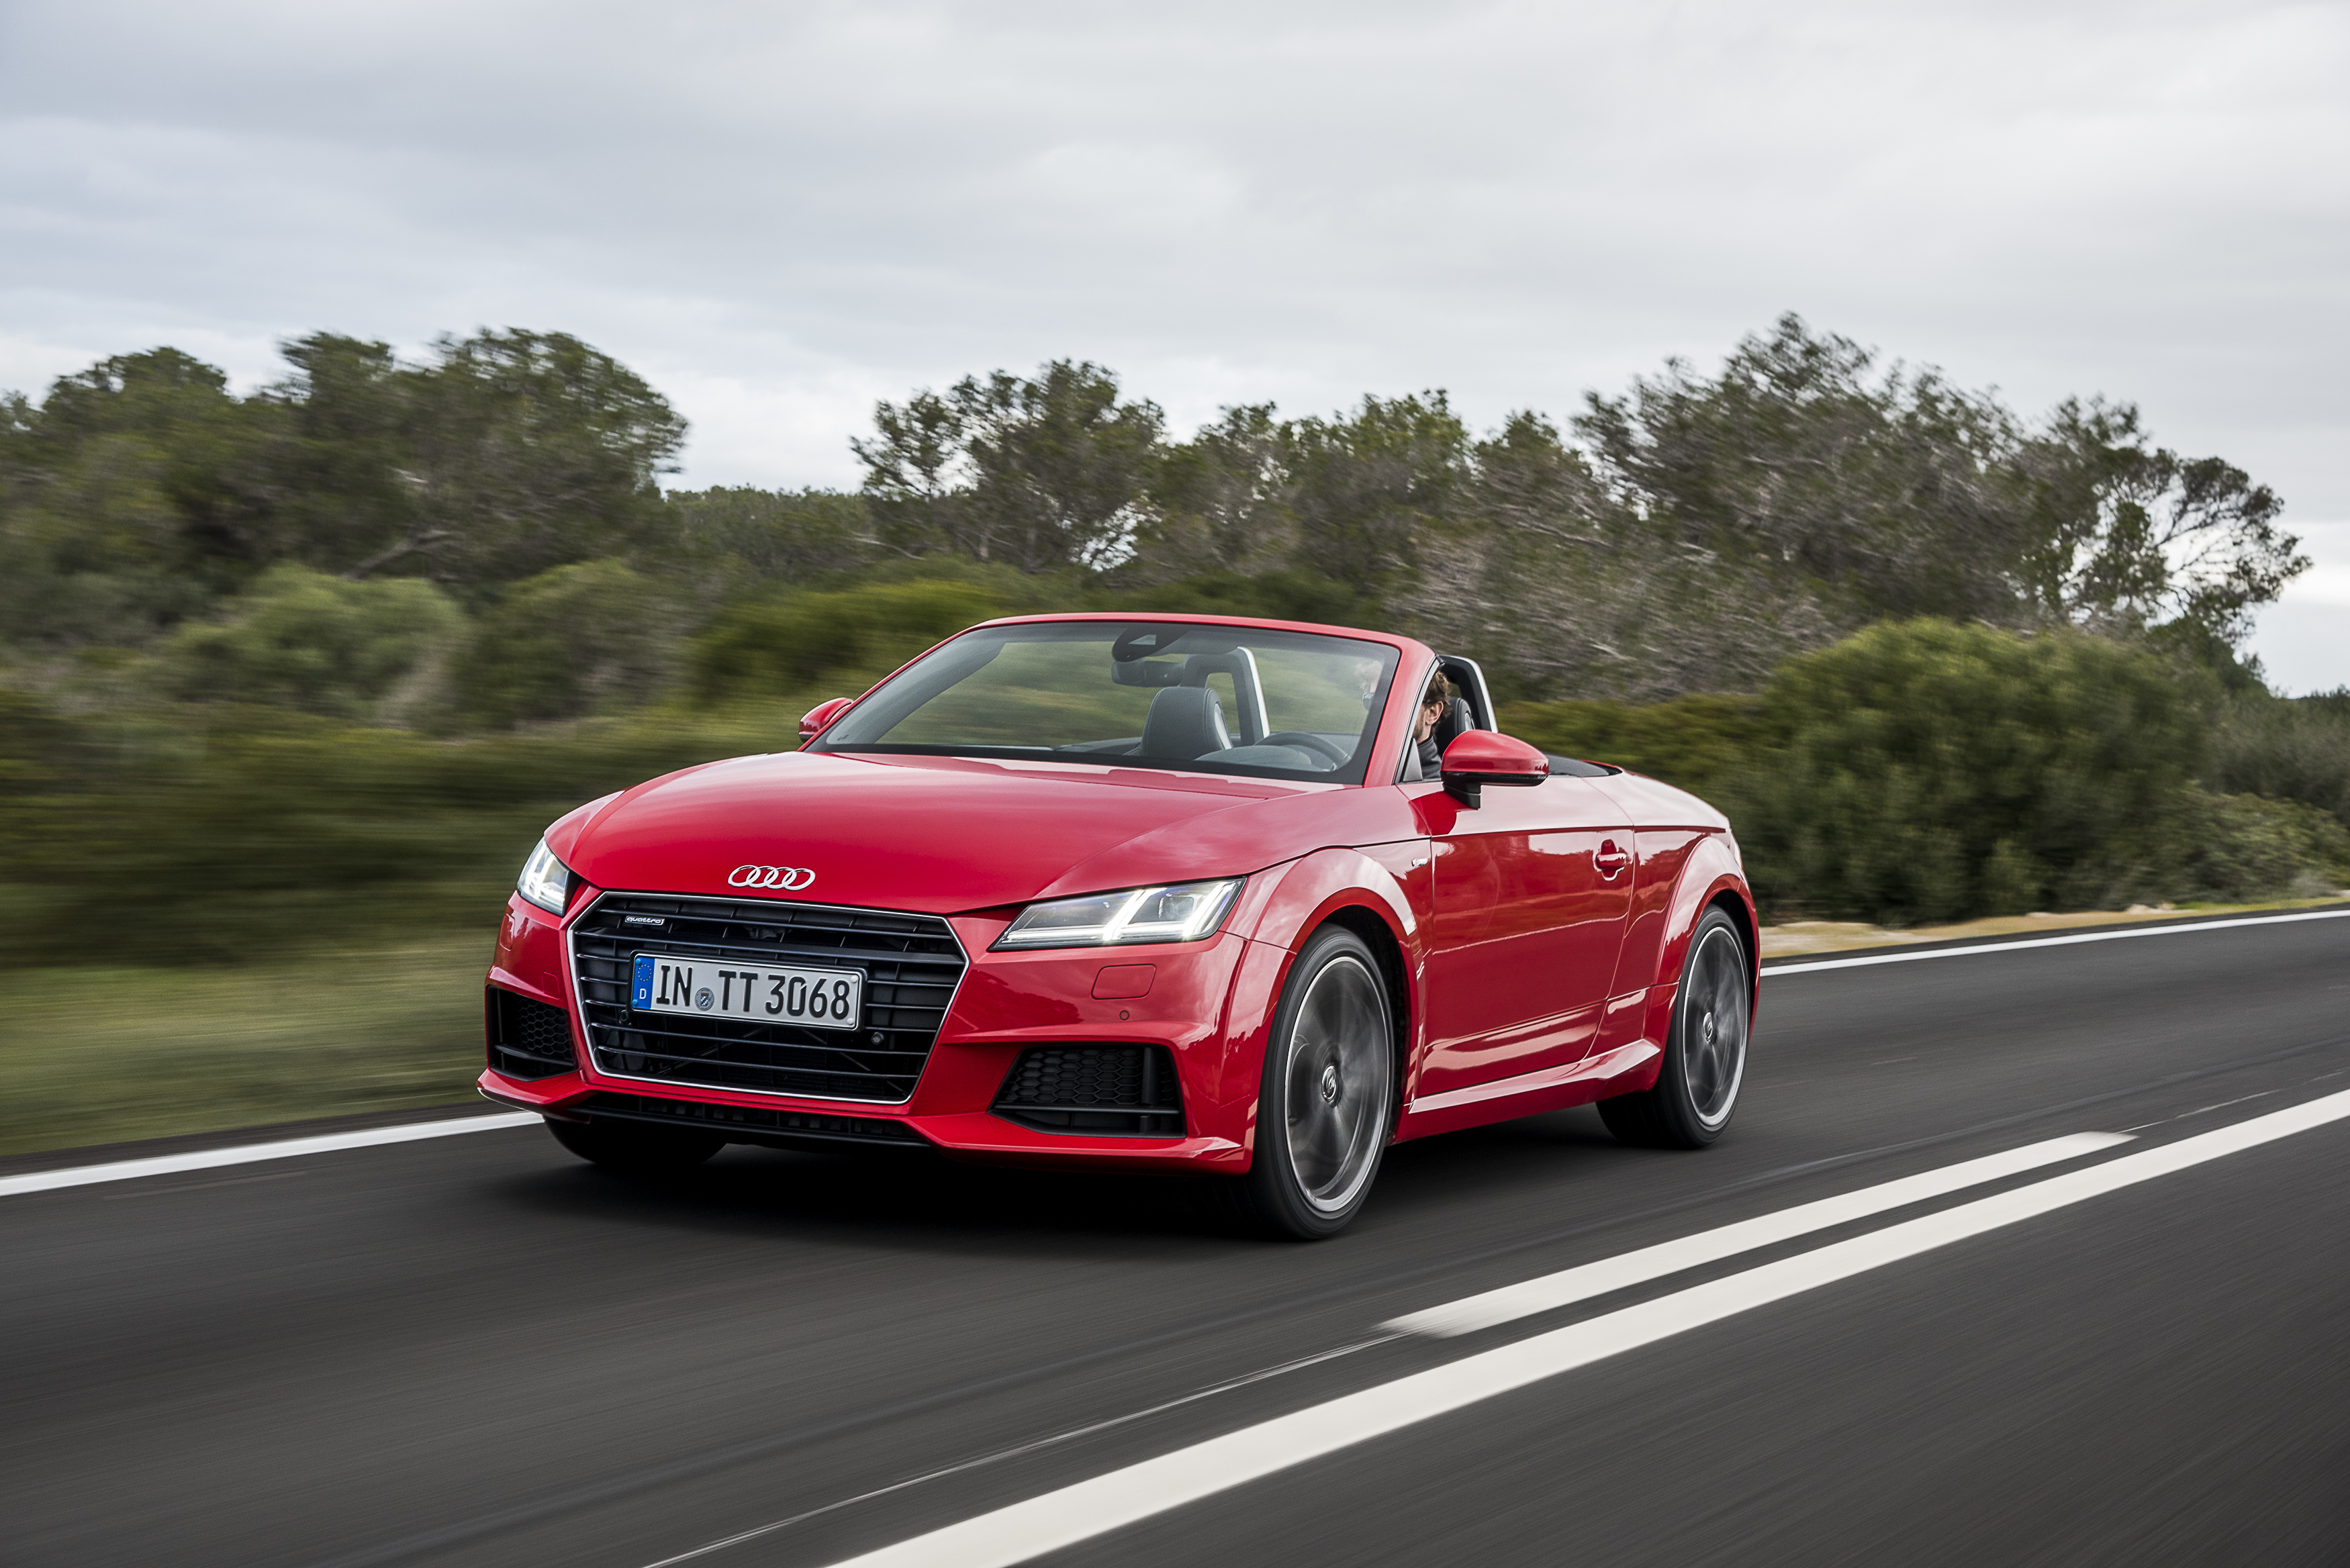 TT Roadster 2.0 TFSI review - specifications, pictures, 0-60 time and more